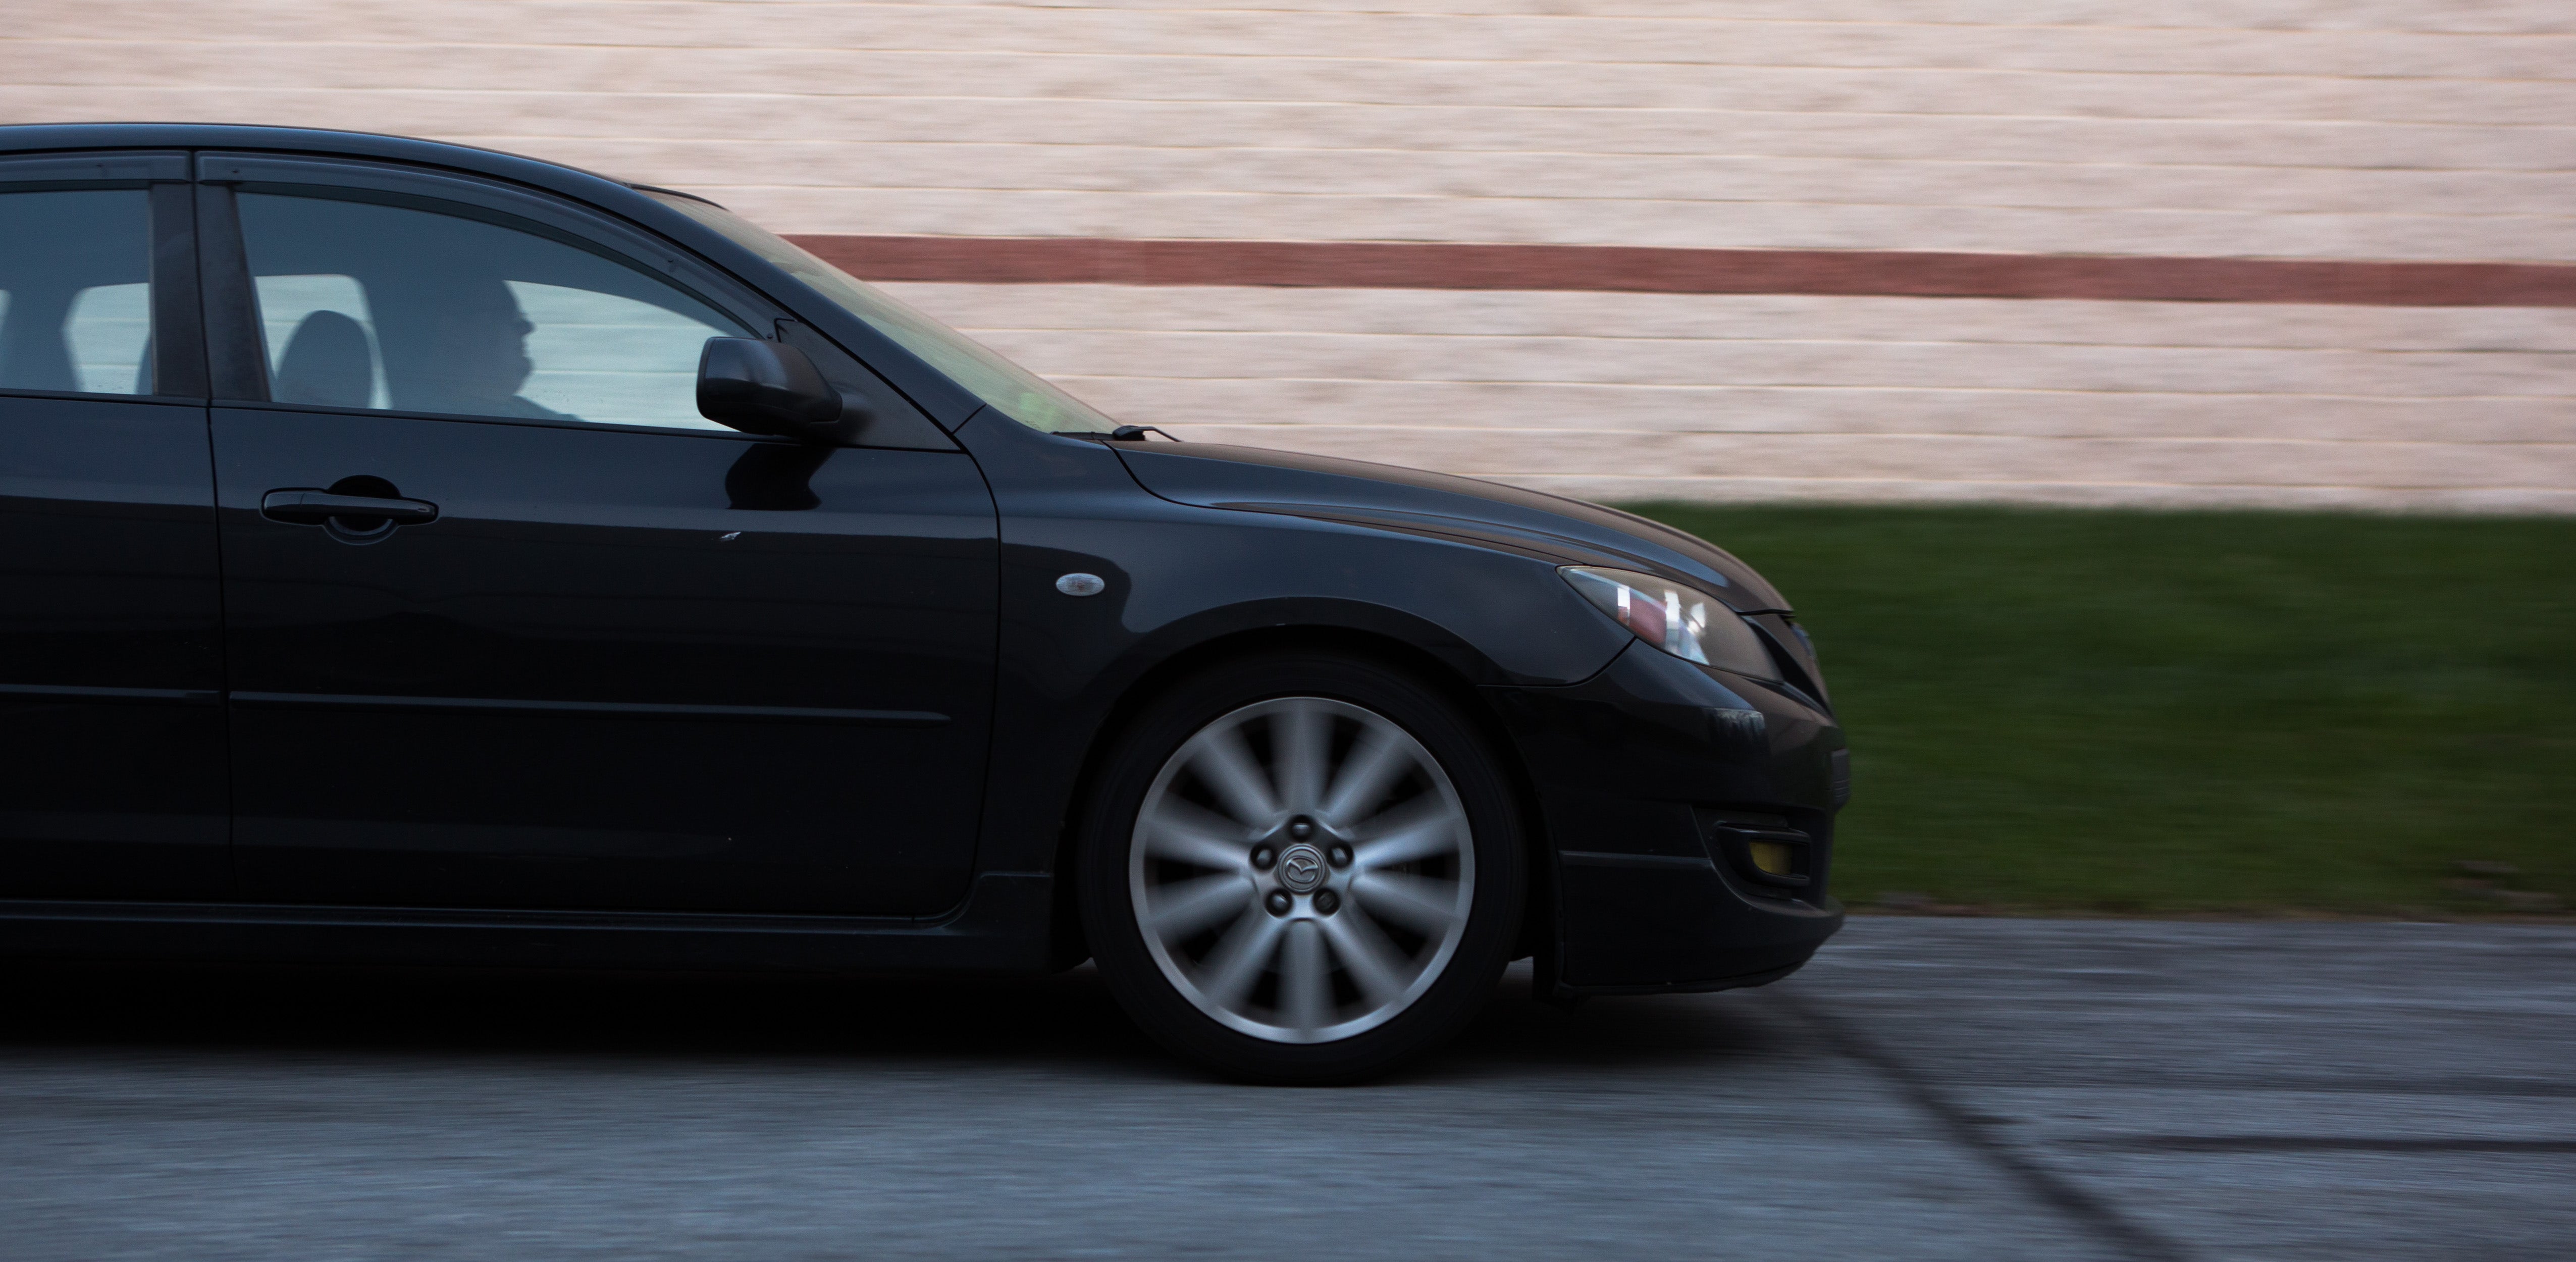 Hot-Hatch Renaissance - 2007-2013 Mazdaspeed 3 Direct Fit Catch Can R&D Part 1 - Stock Review